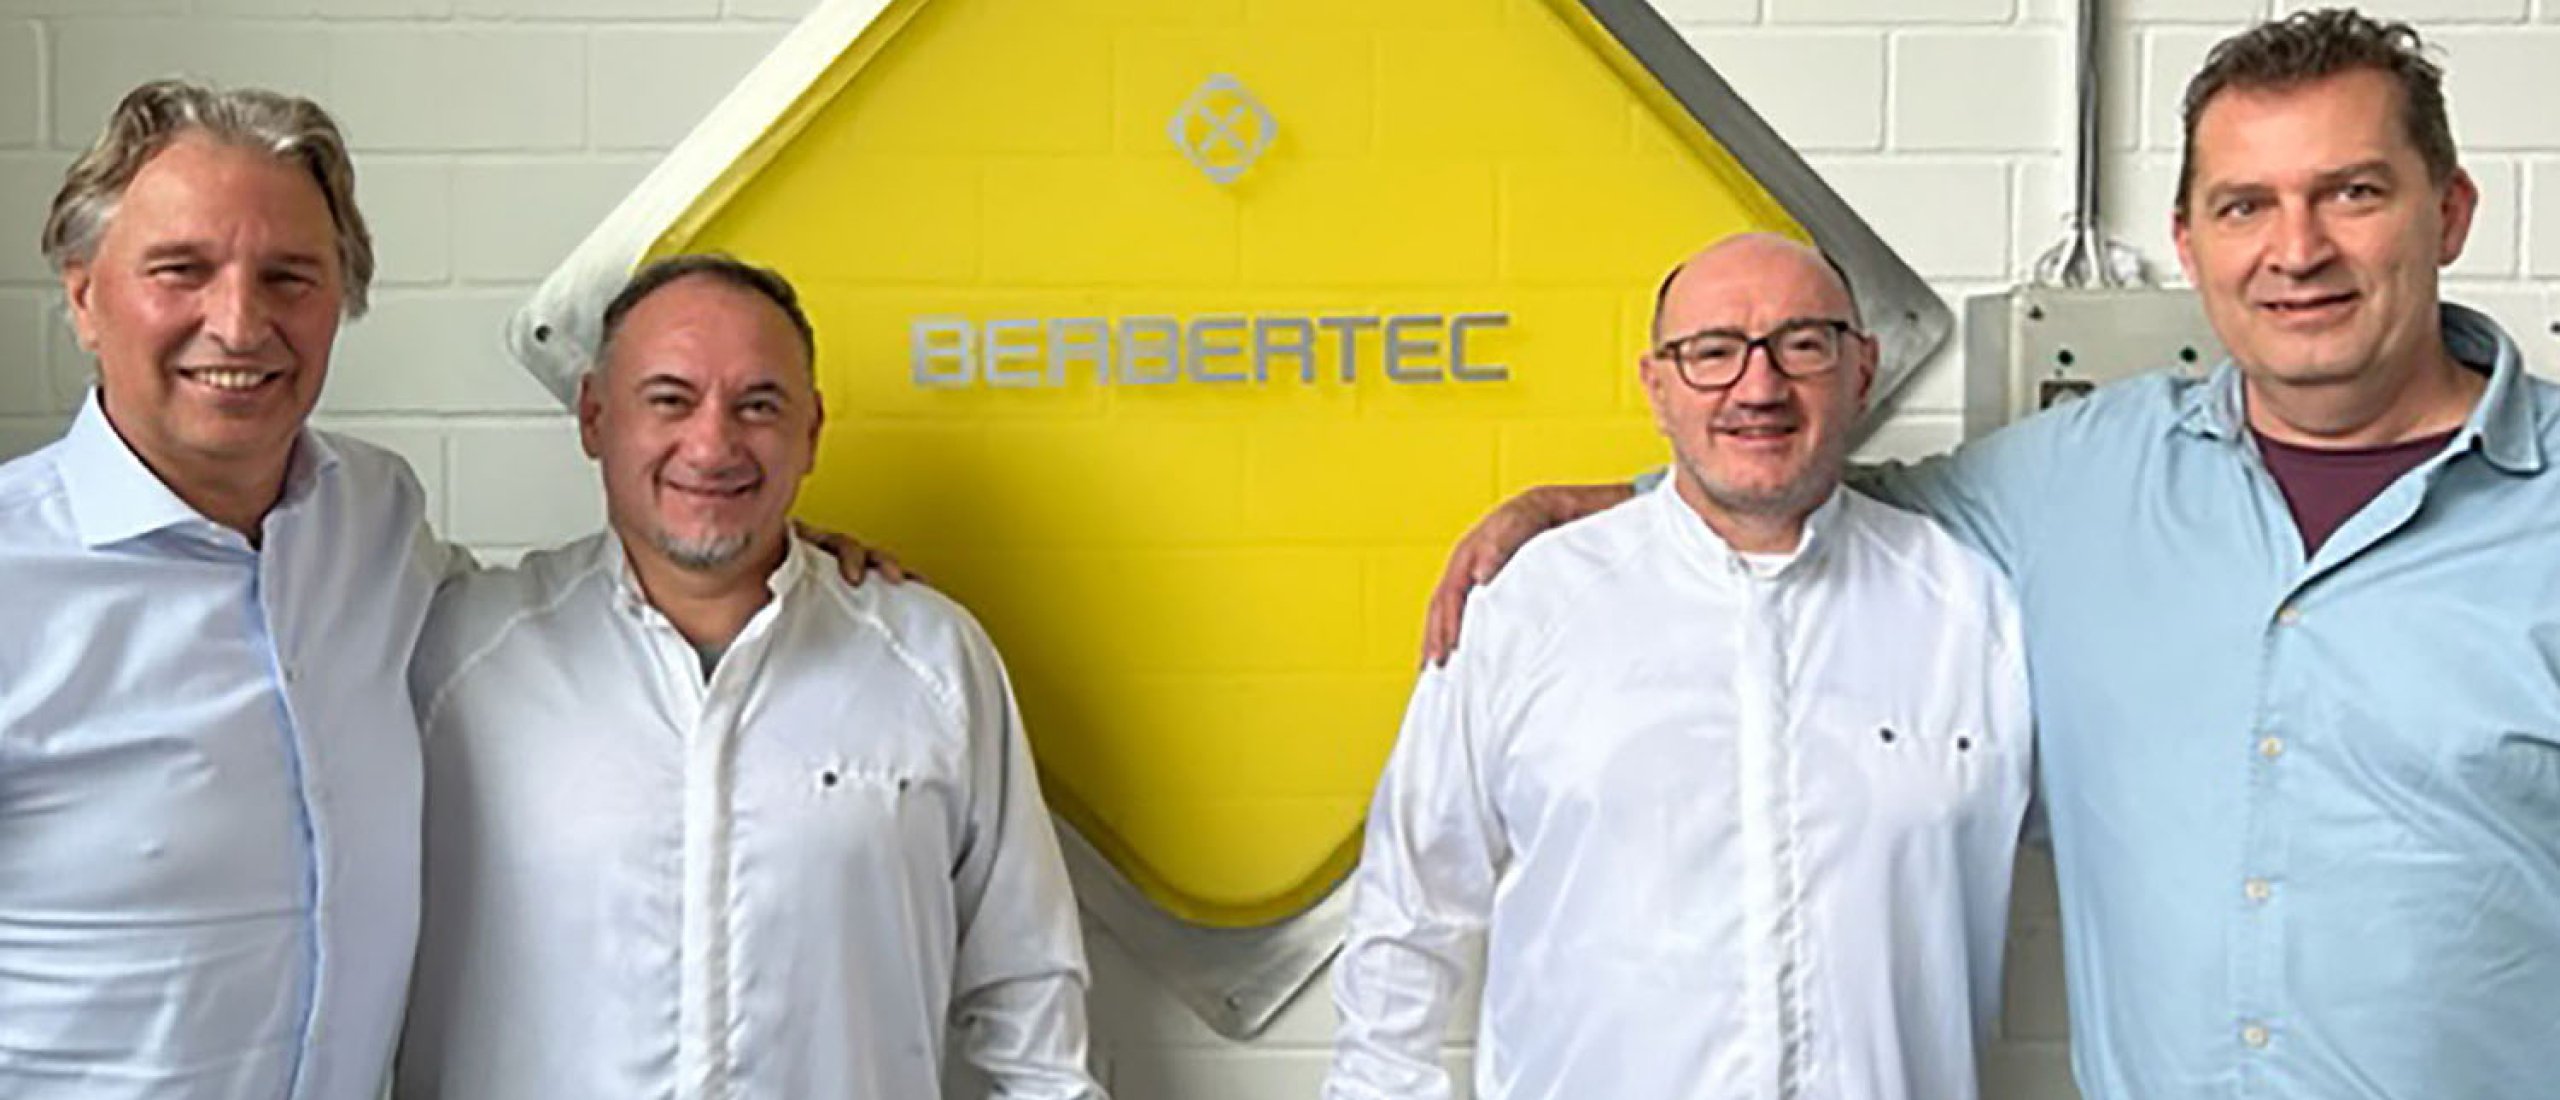 Partnertec signs official distribution contract with Berbertec GmbH for the Benelux